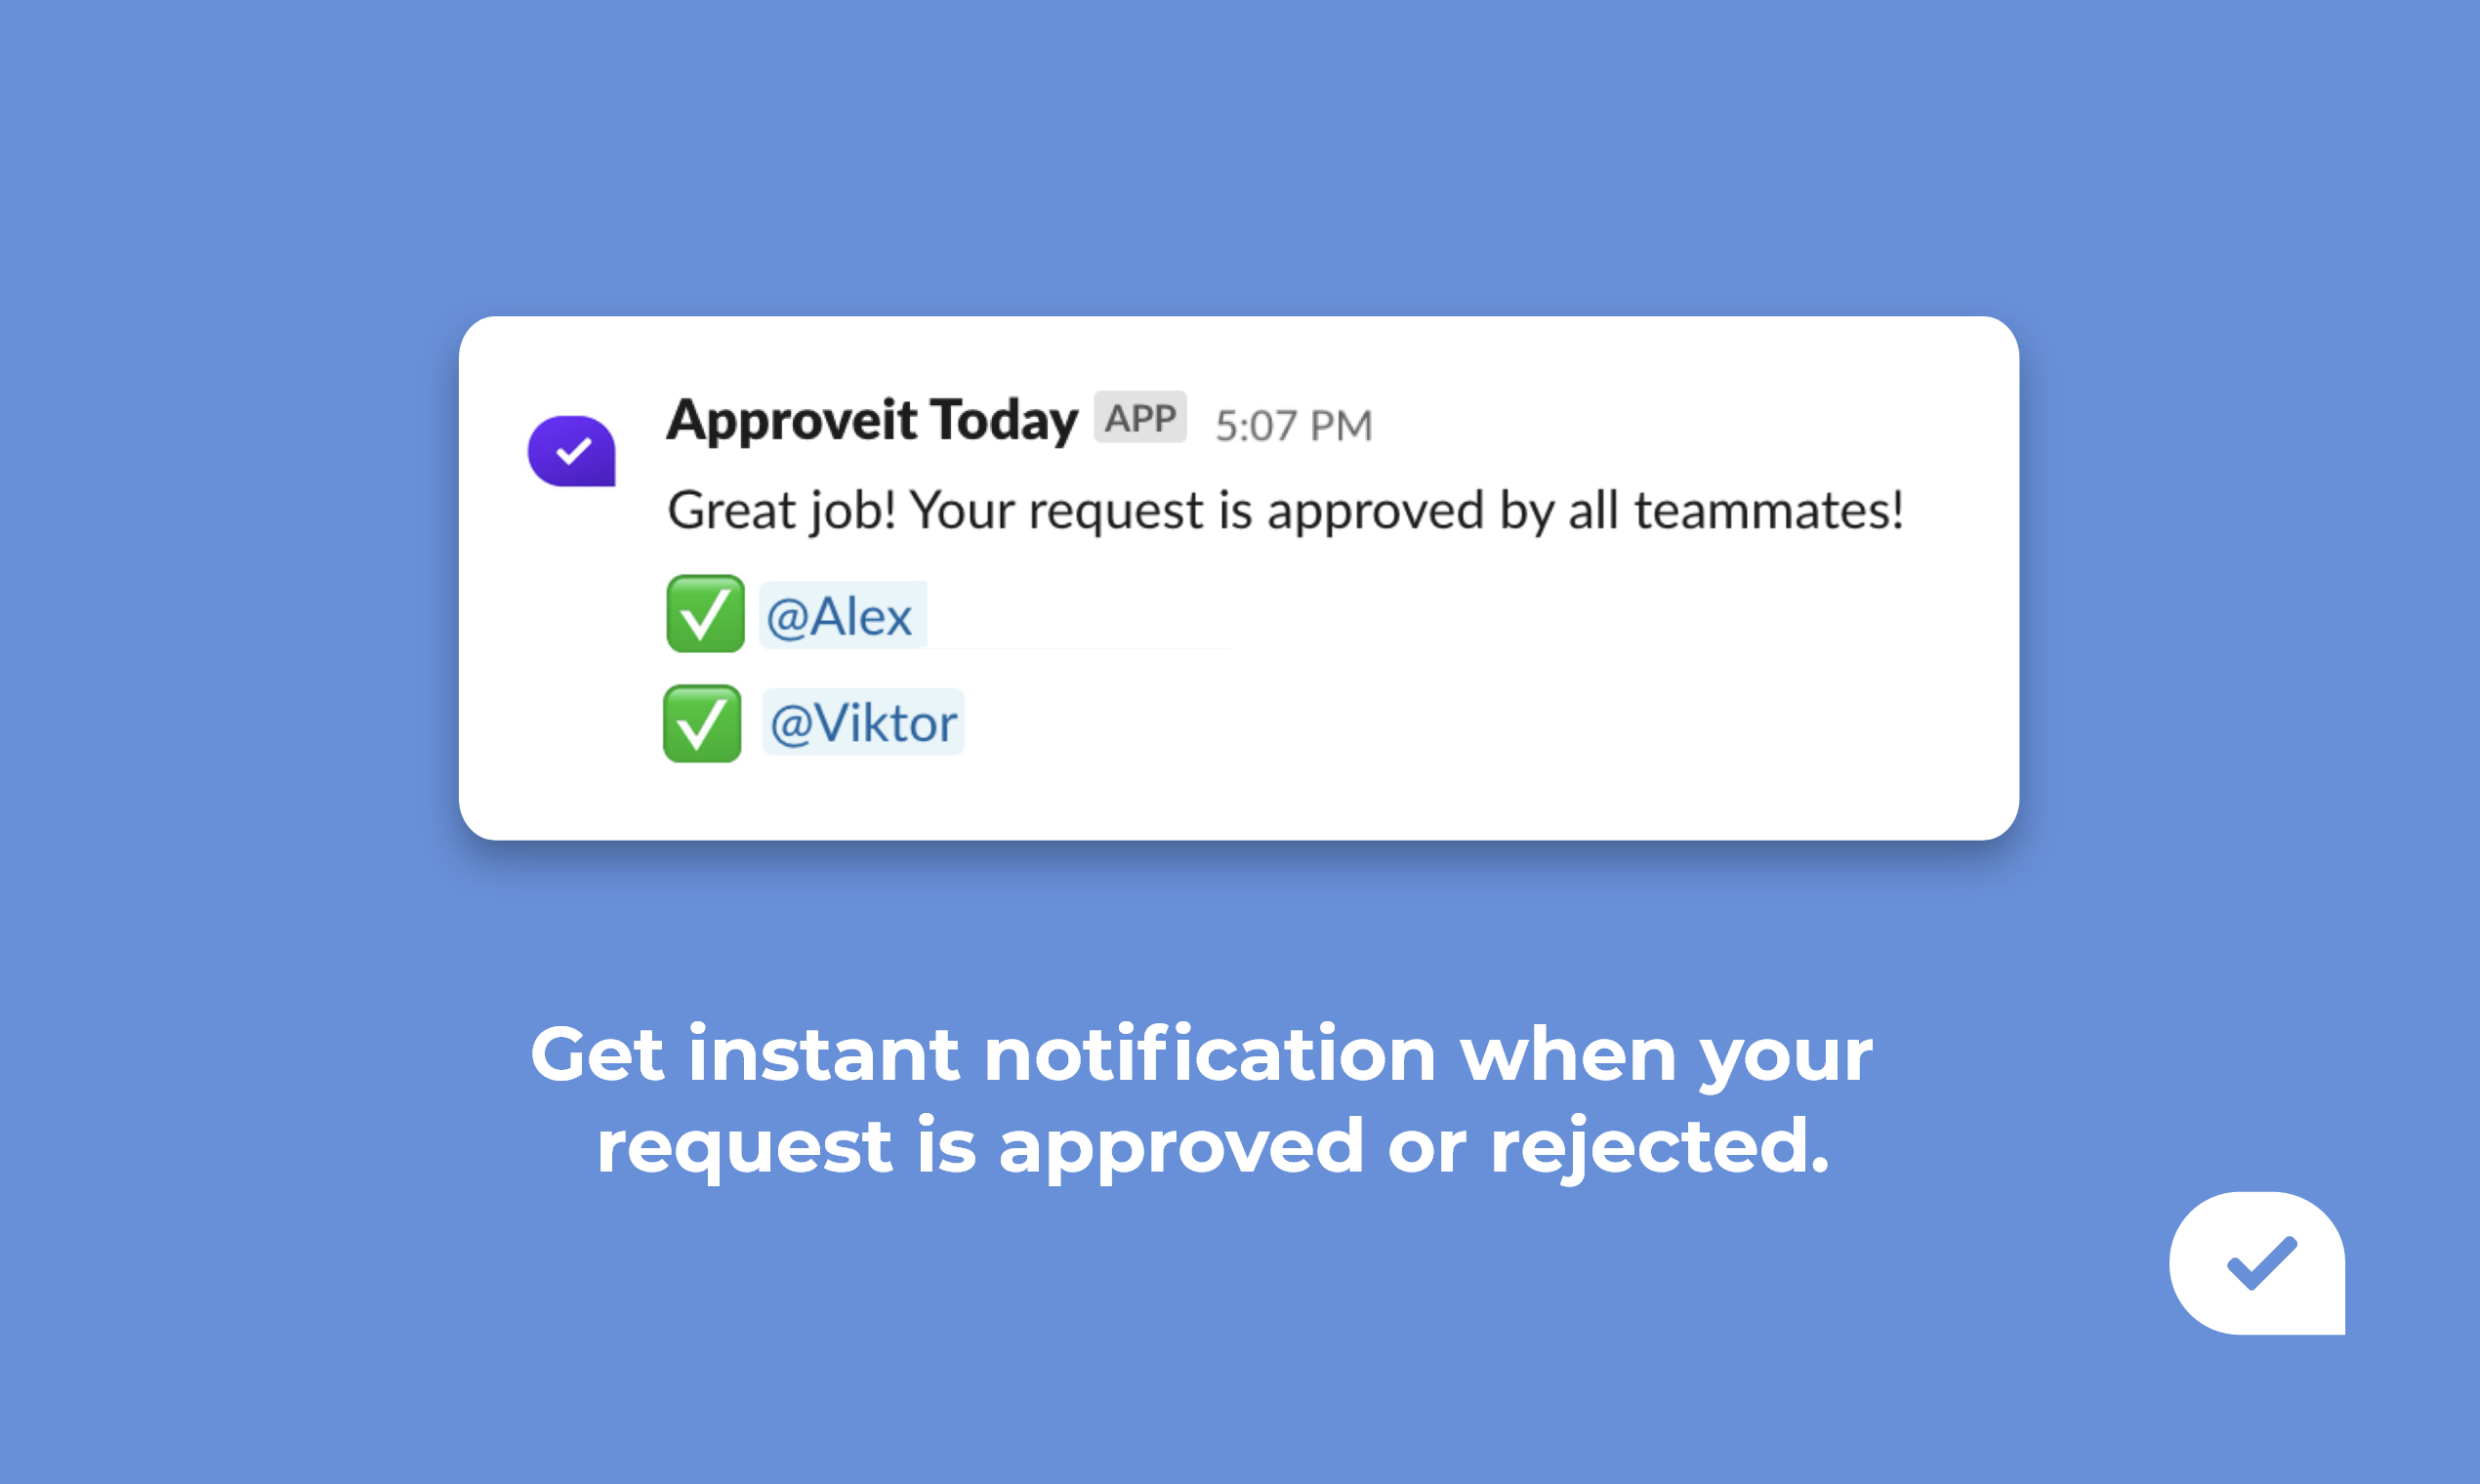 Get feedback from a vast remote working audience about Approveit Today